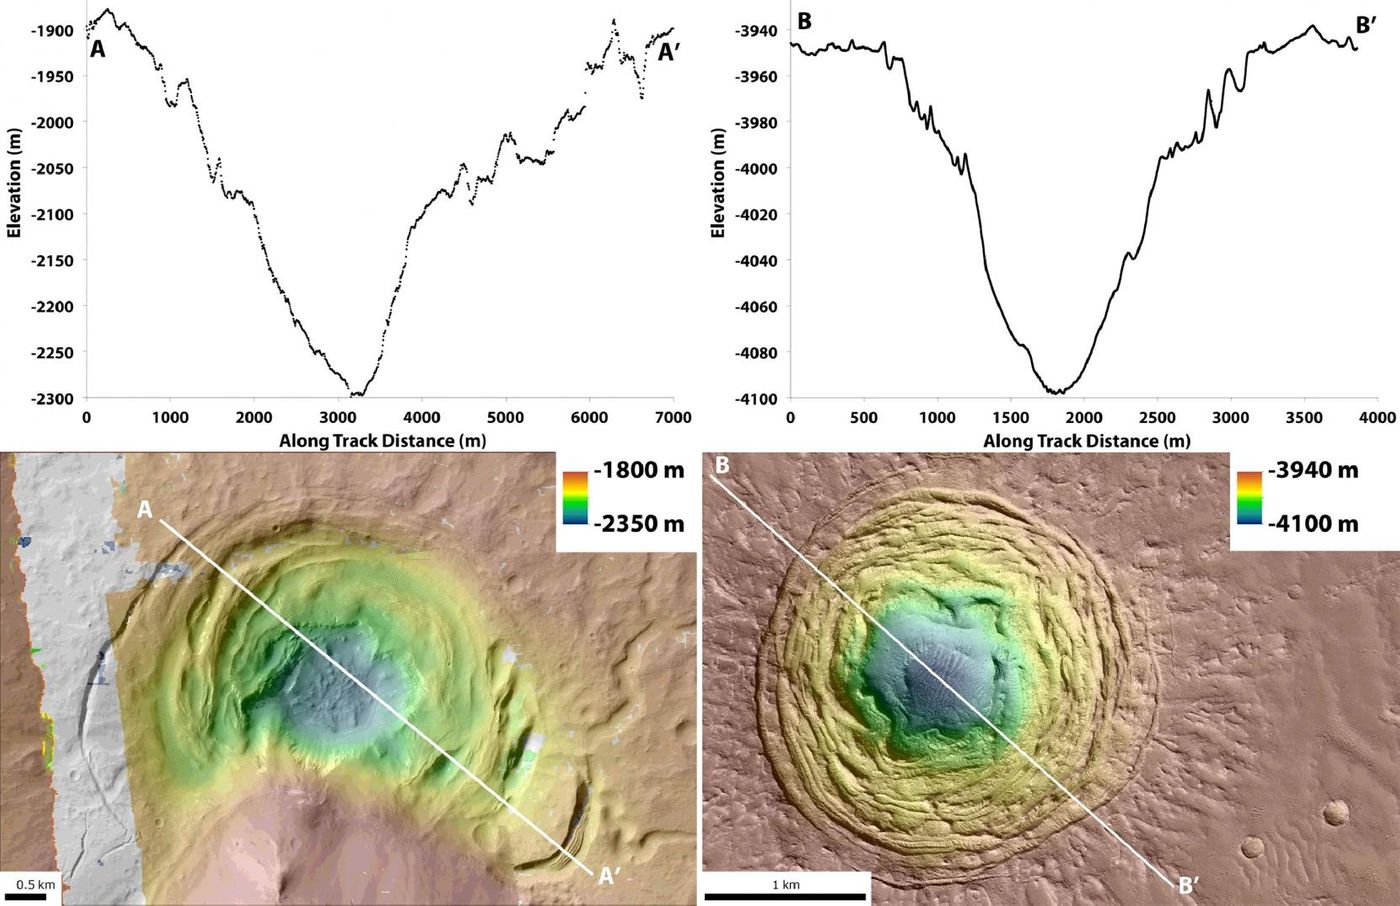 These depressions on Mars' surface may contain building blocks for life, researchers say.